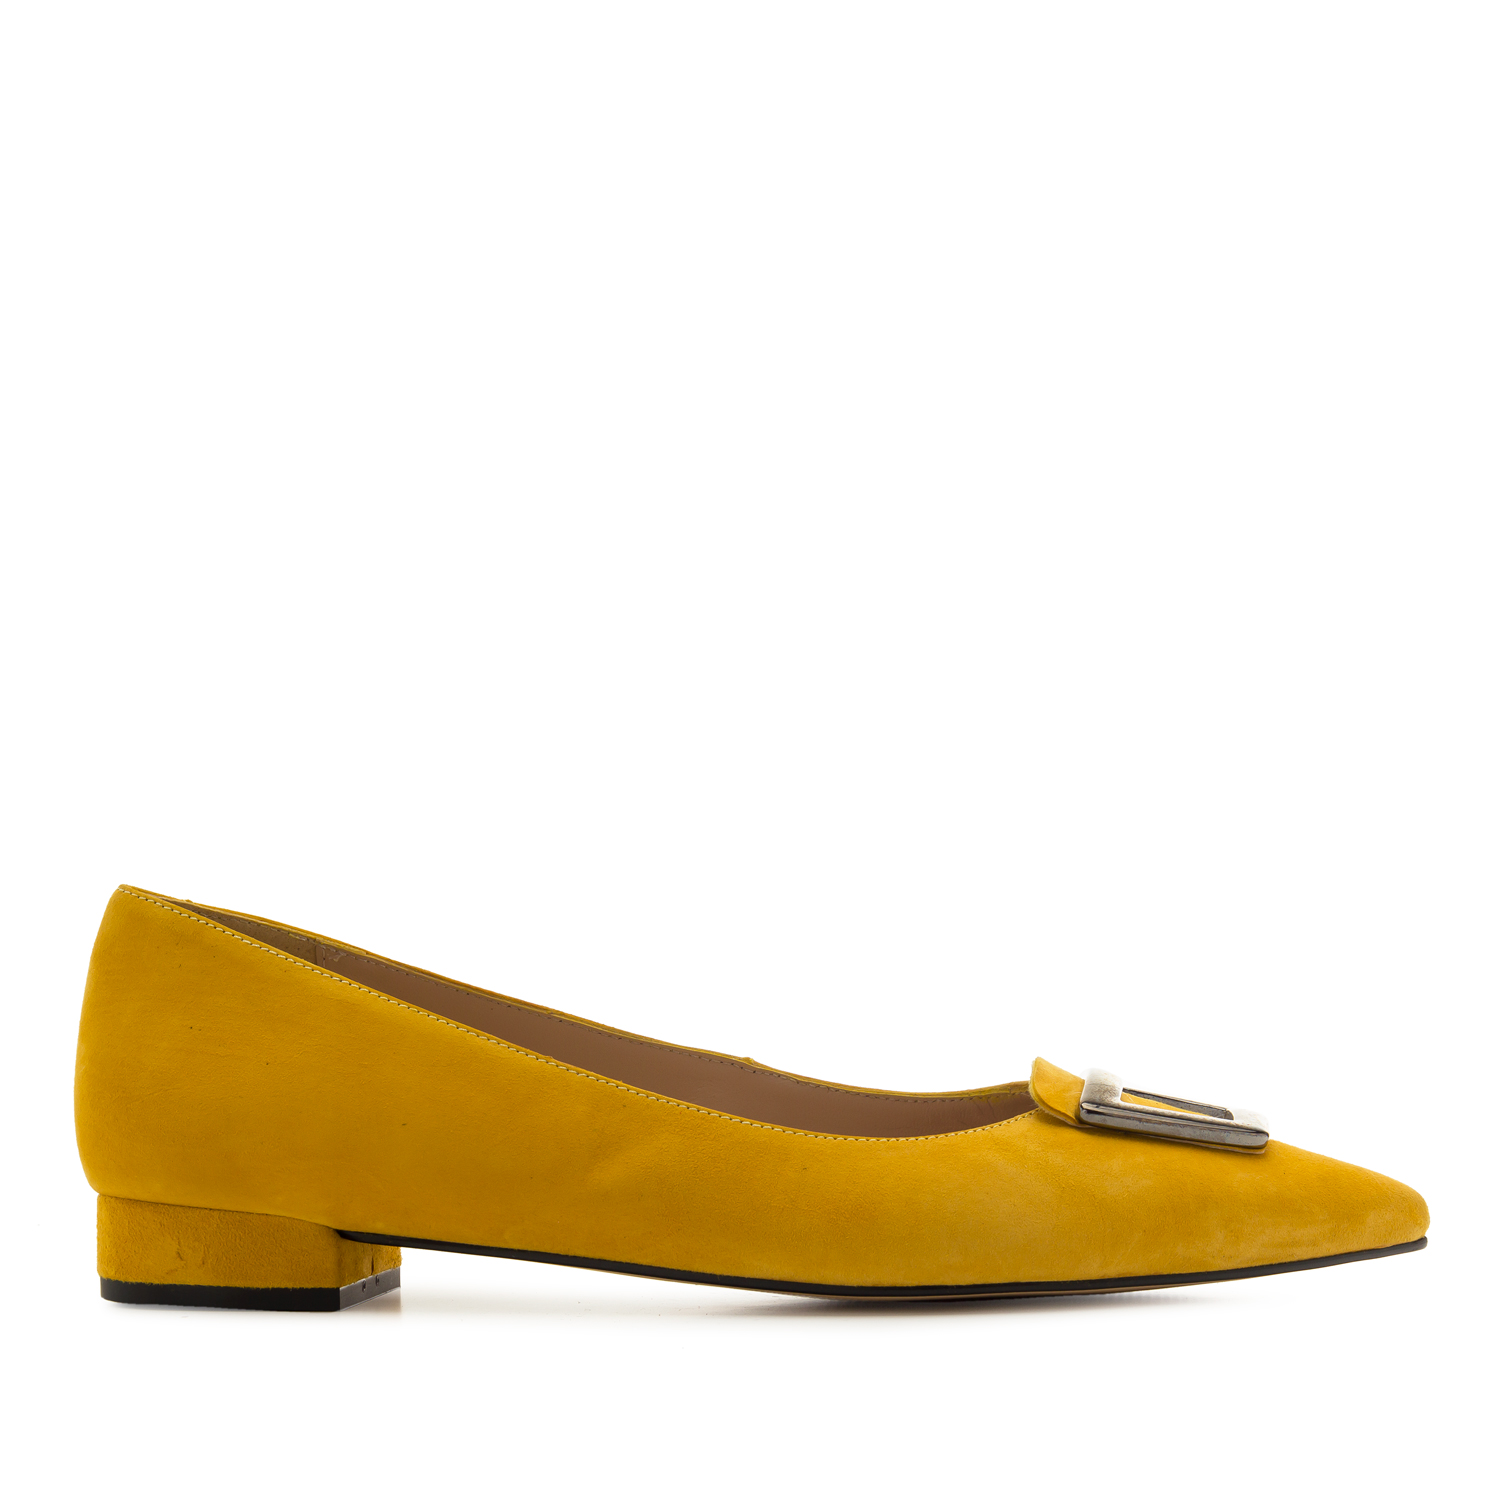 Trim Loafers in Mustard Suede Leather 